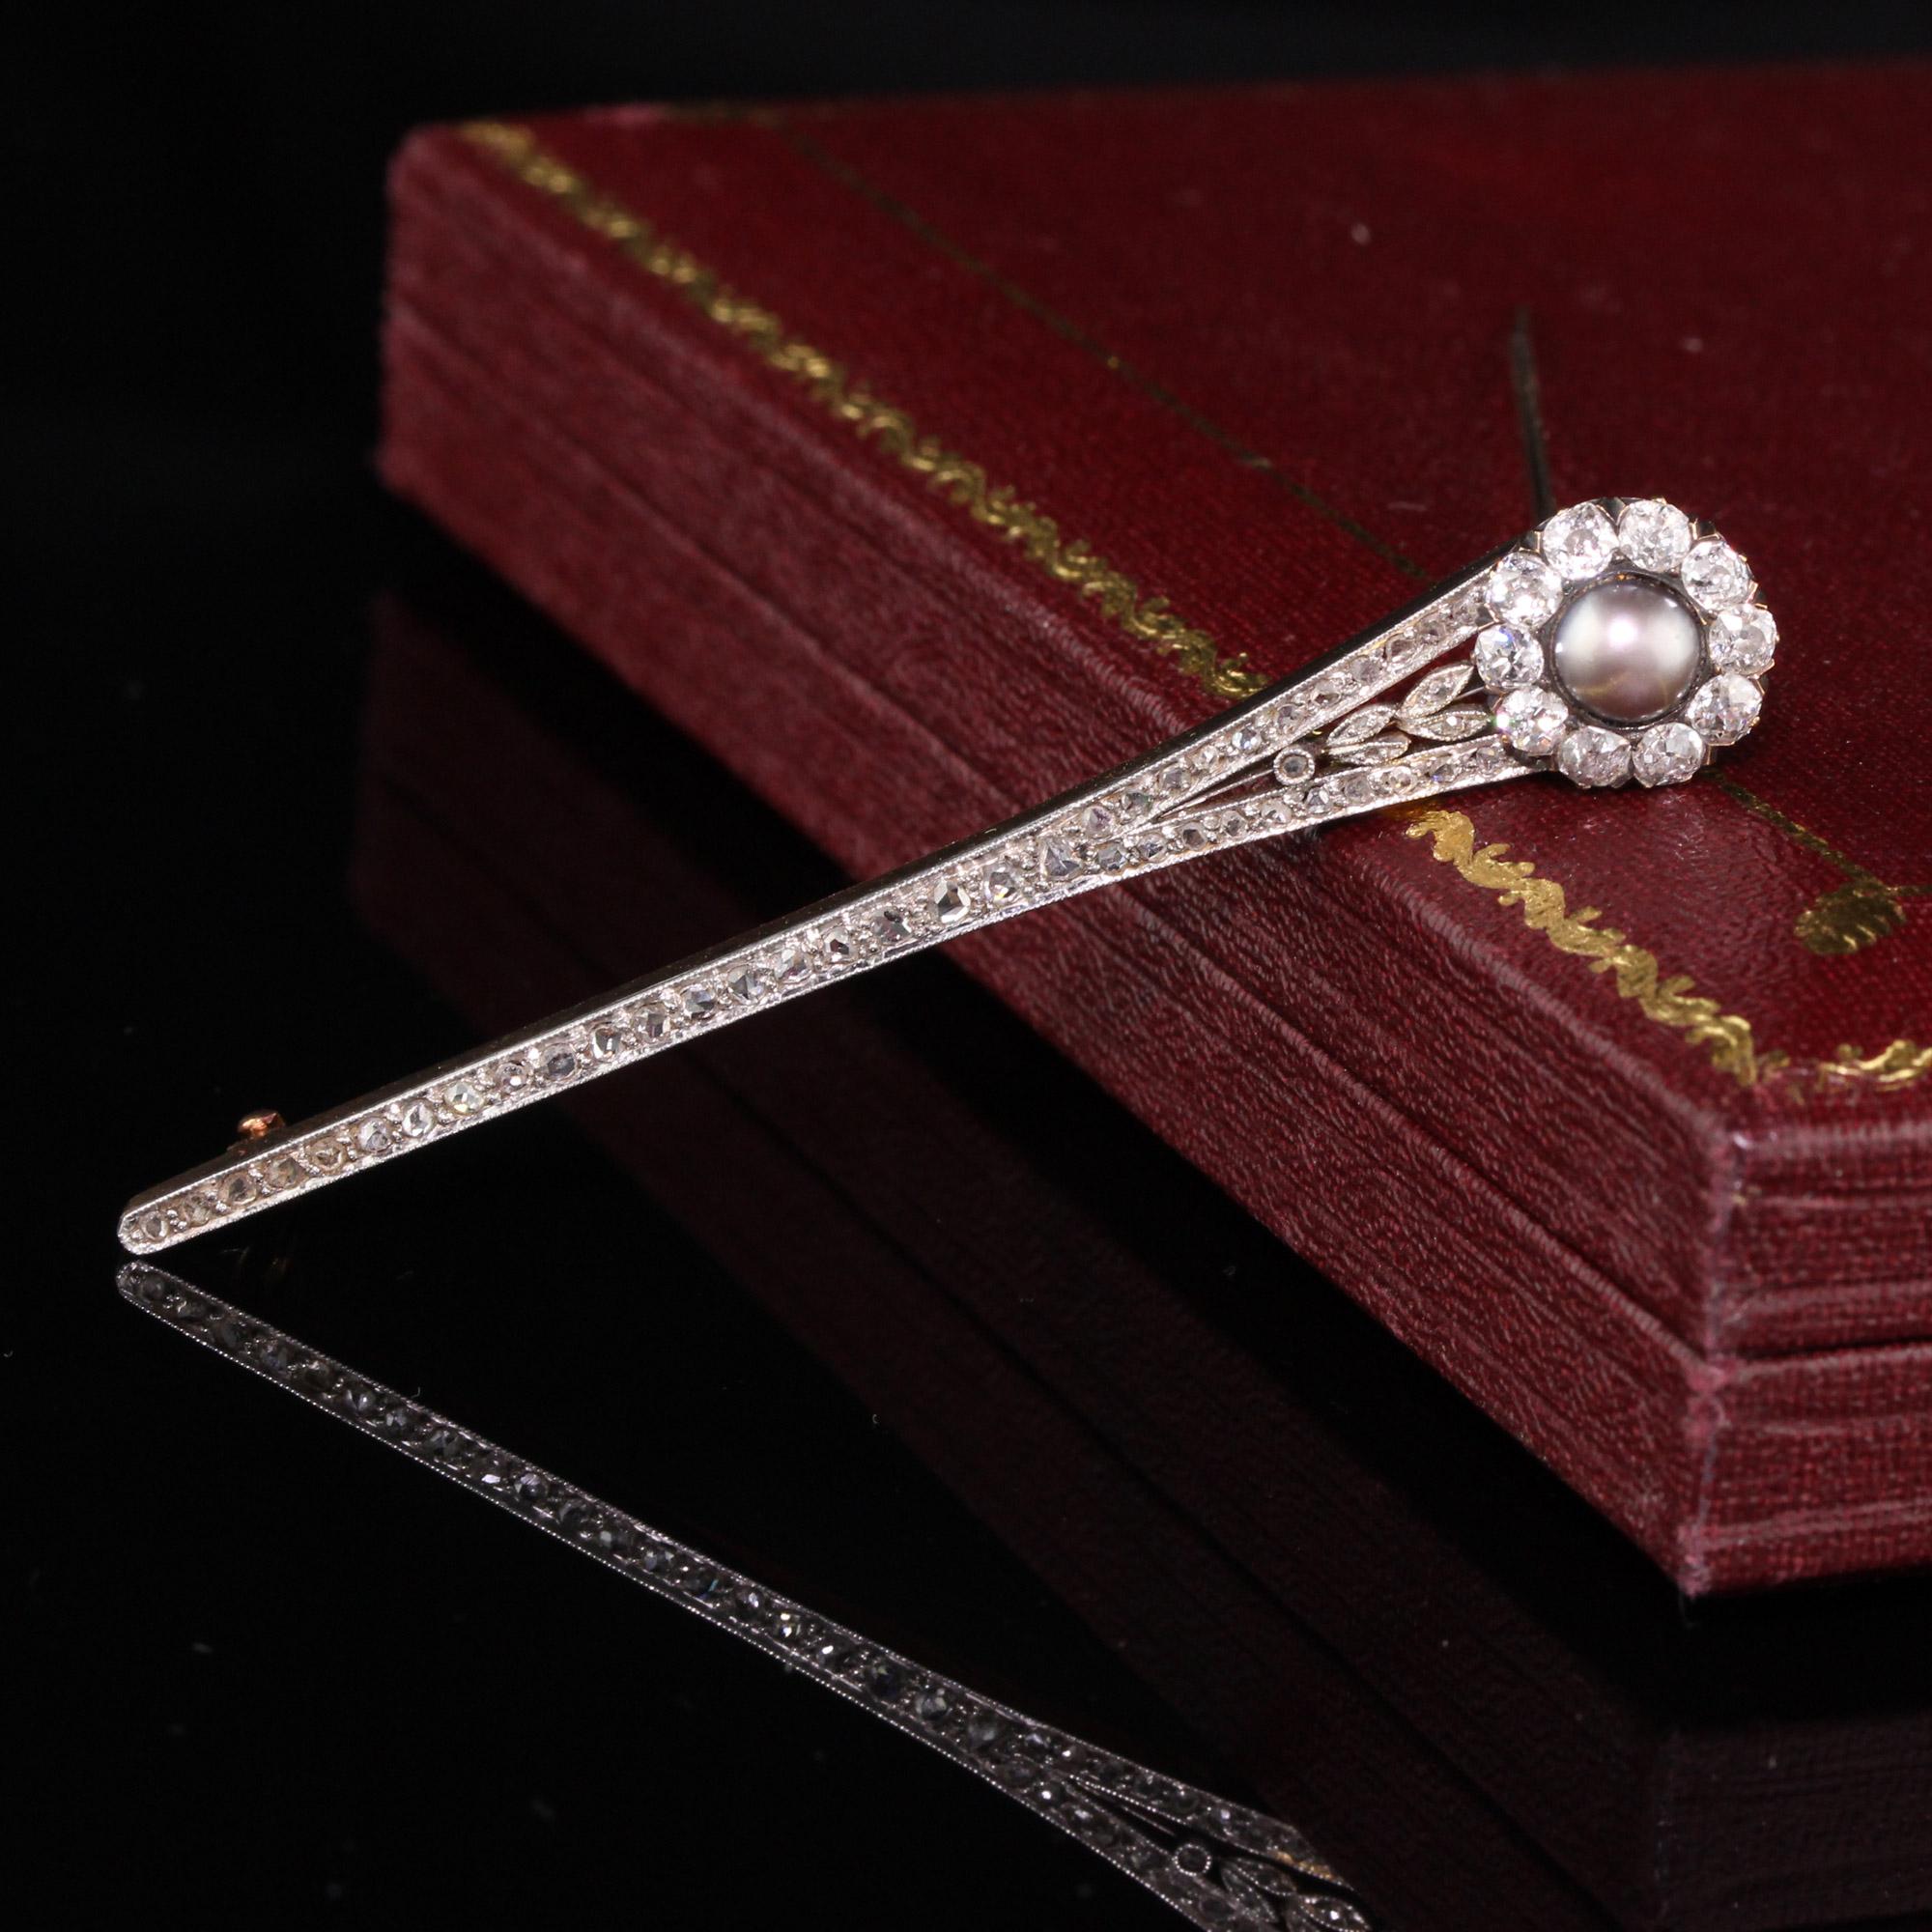 Gorgeous Victorian flower brooch with a Natural Pearl that is surrounded by Old Mine Cut diamonds.

#P0008

Metal: Platinum and 18K Gold

Weight: 7.5 Grams

Total Diamond Weight: Approximately 1.50 CTS

Diamond Color: H

Diamond Clarity: SI1